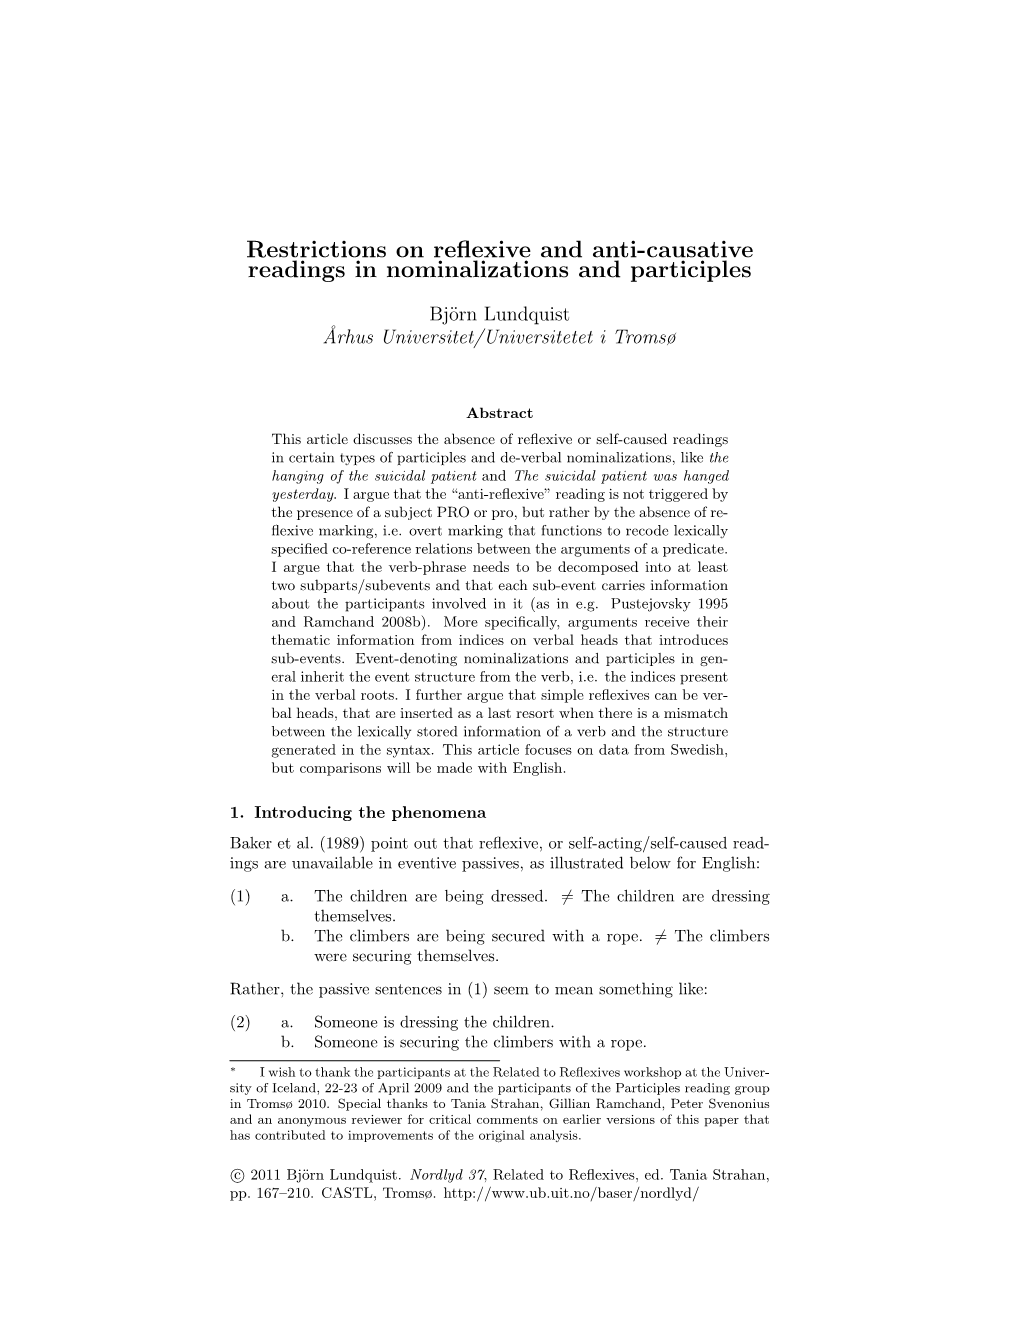 Restrictions on Reflexive and Anti-Causative Readings In